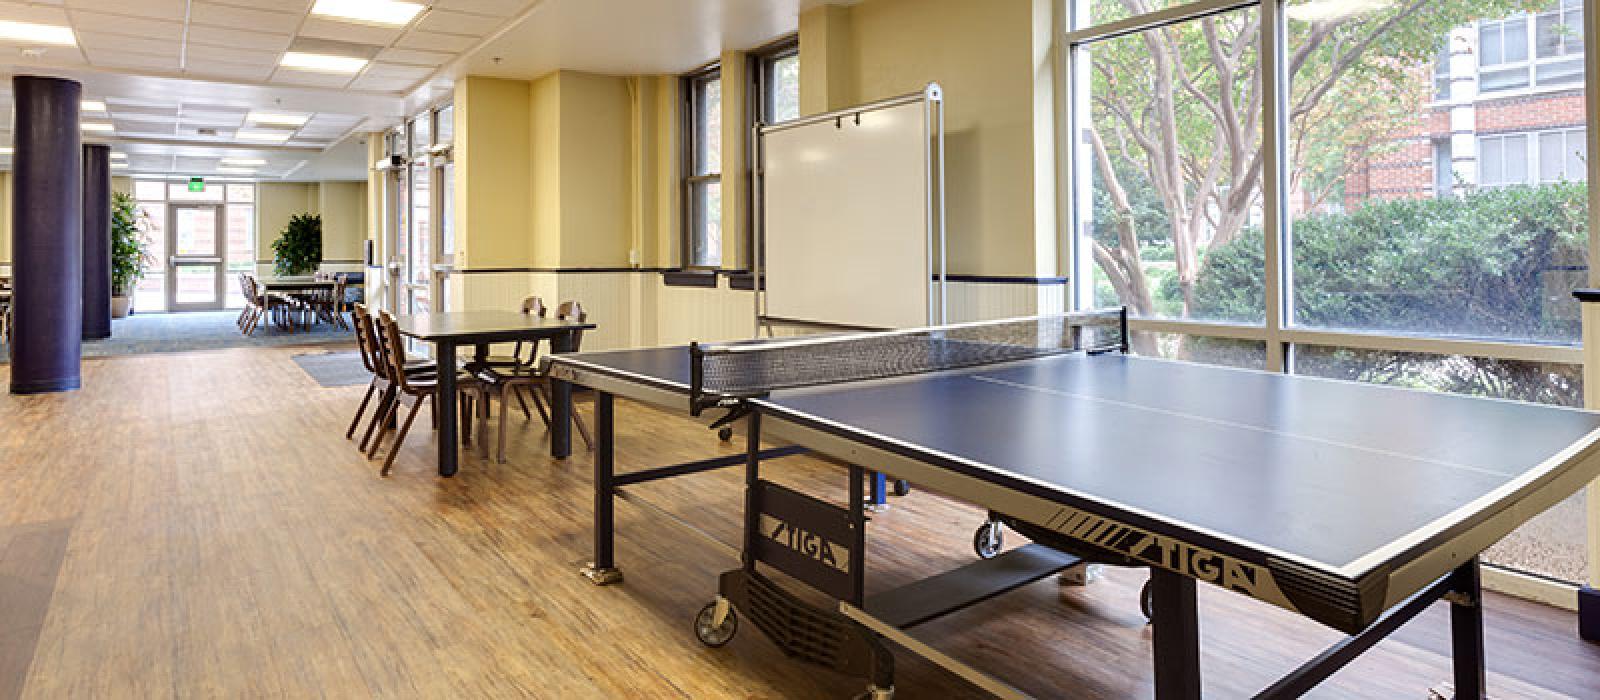 Recreation area with table tennis, tables and chairs.